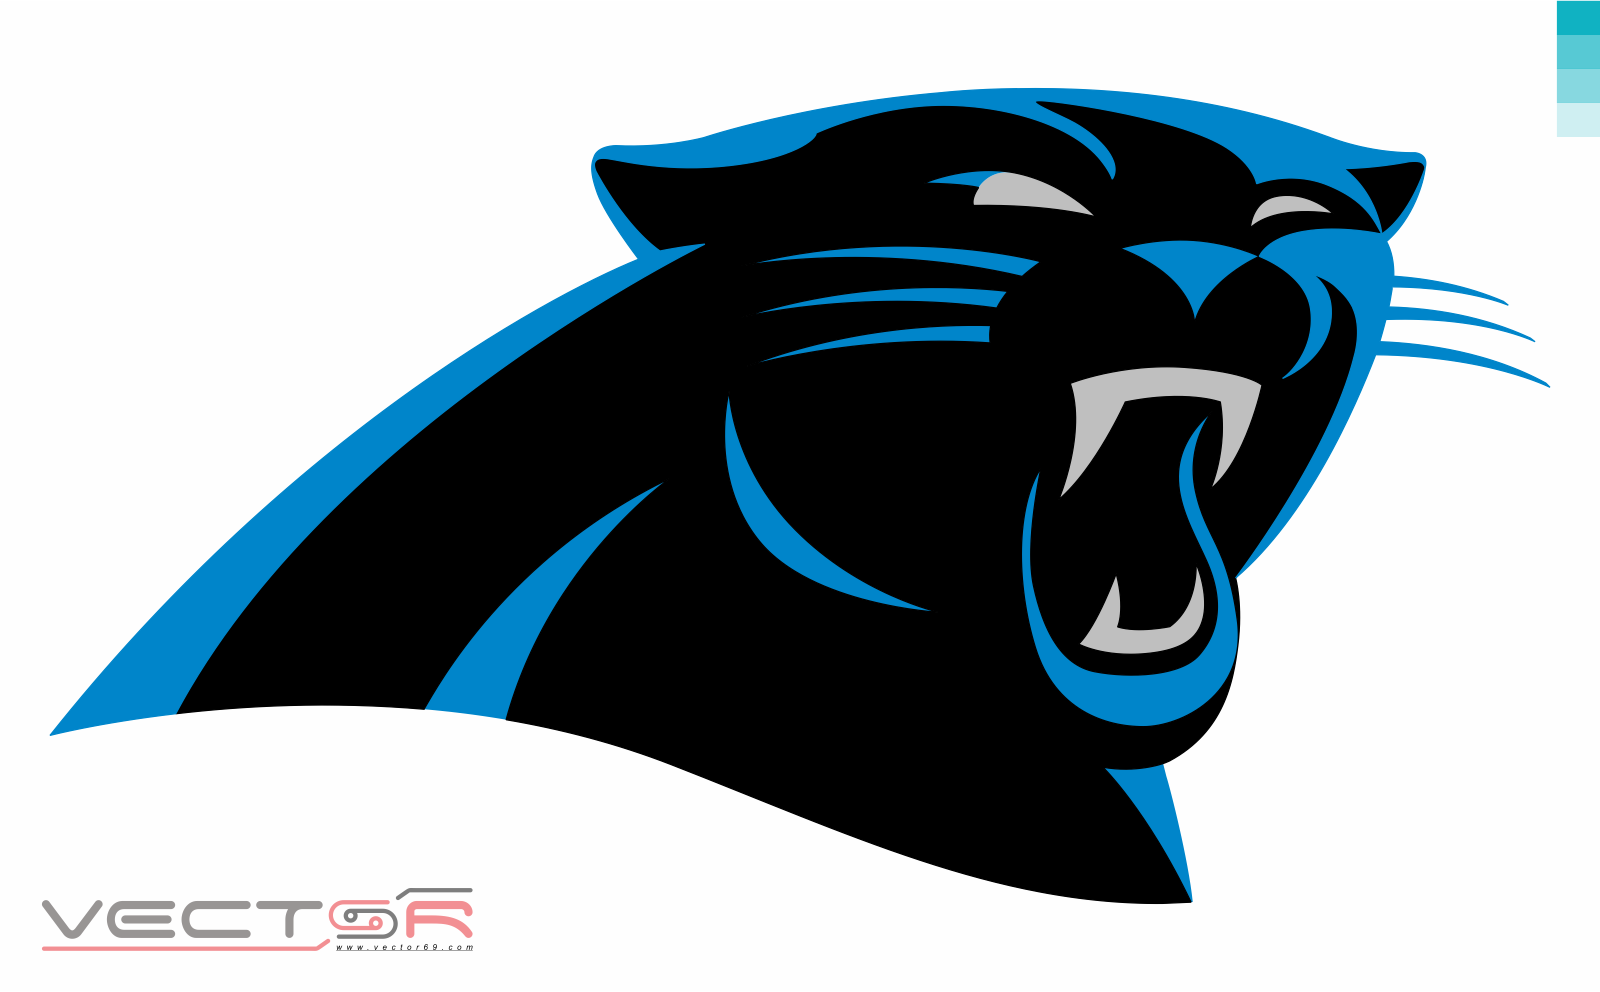 Carolina Panthers 2012 Logo - Download Vector File SVG (Scalable Vector Graphics)